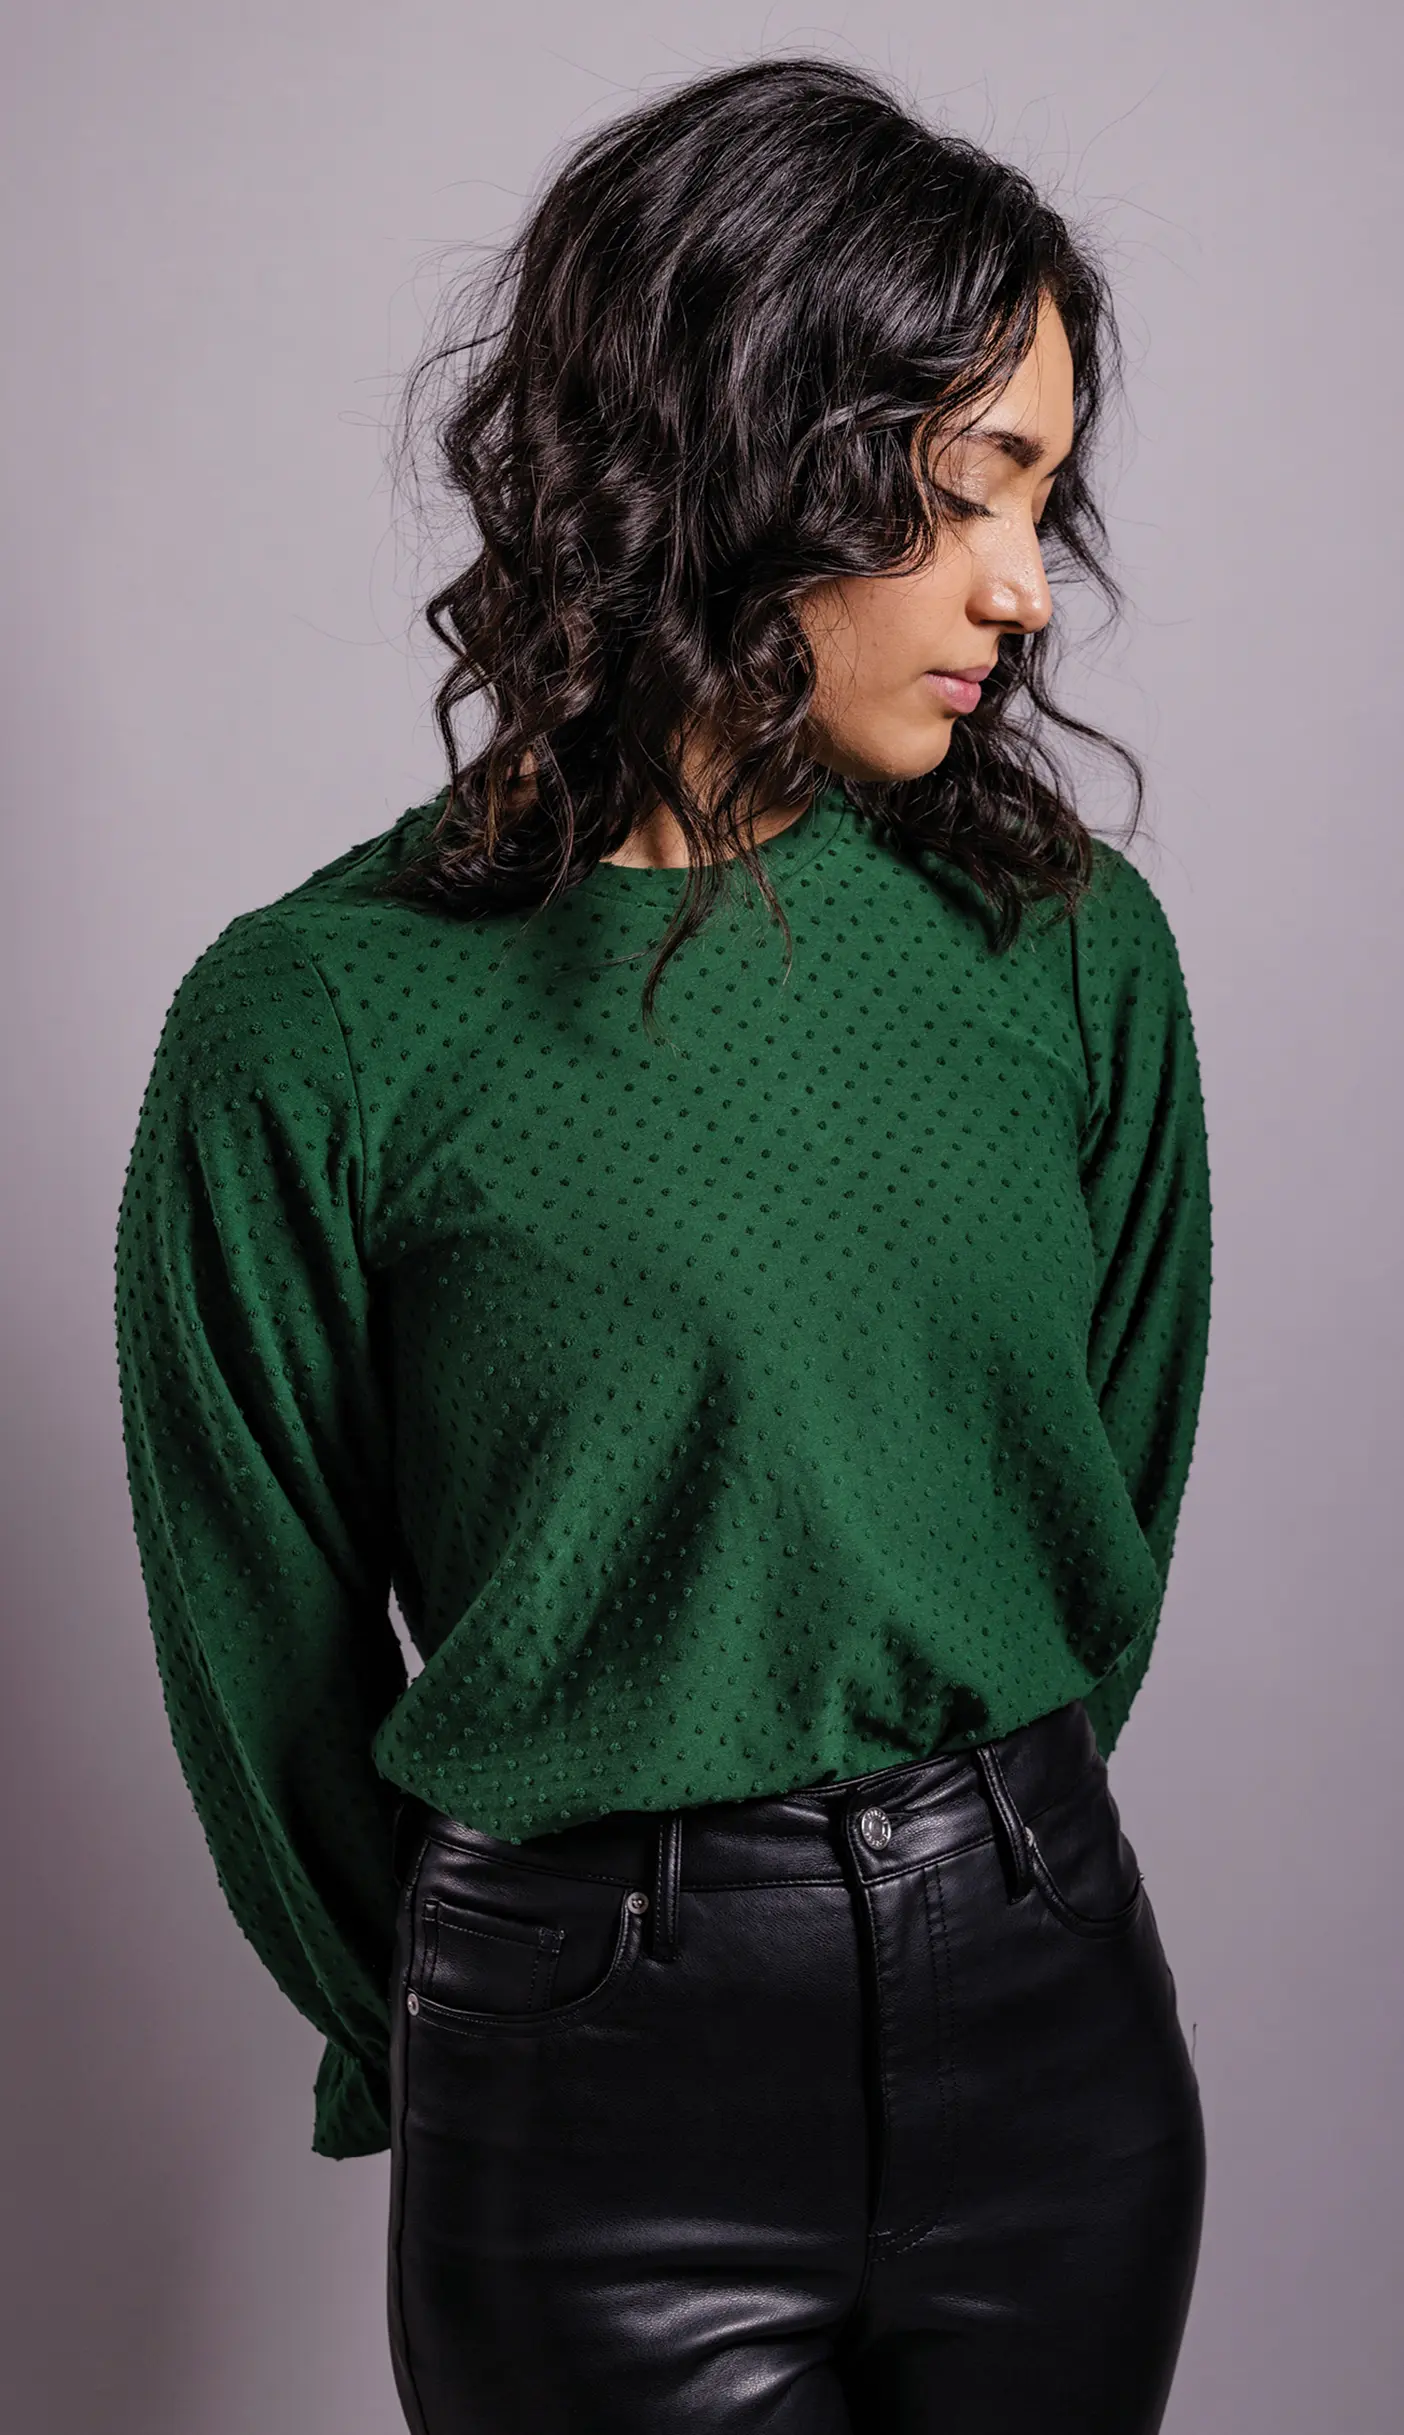 A woman in a green sweater poses